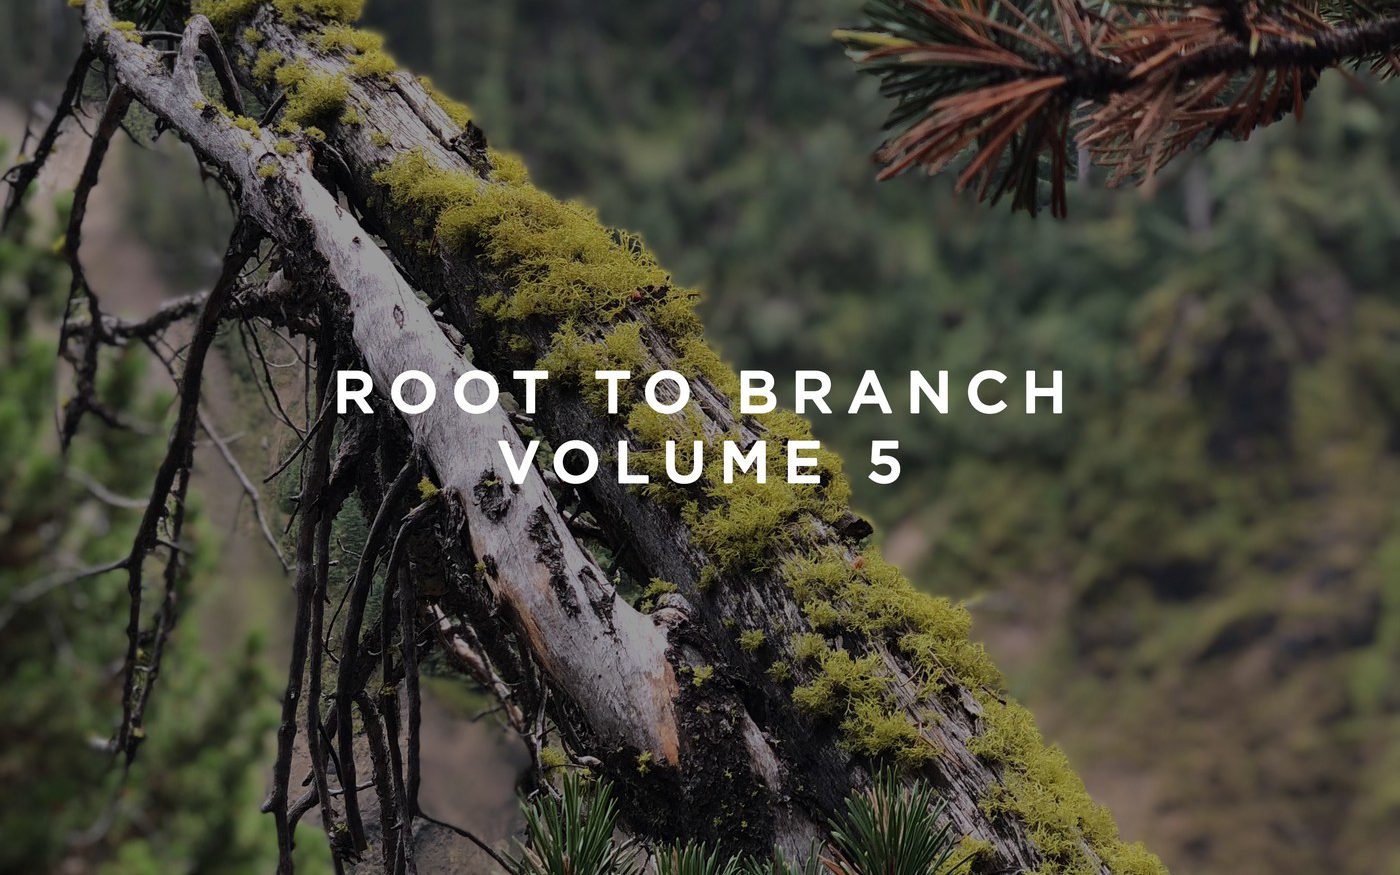 This Never Happened Root To Branch Volume 5